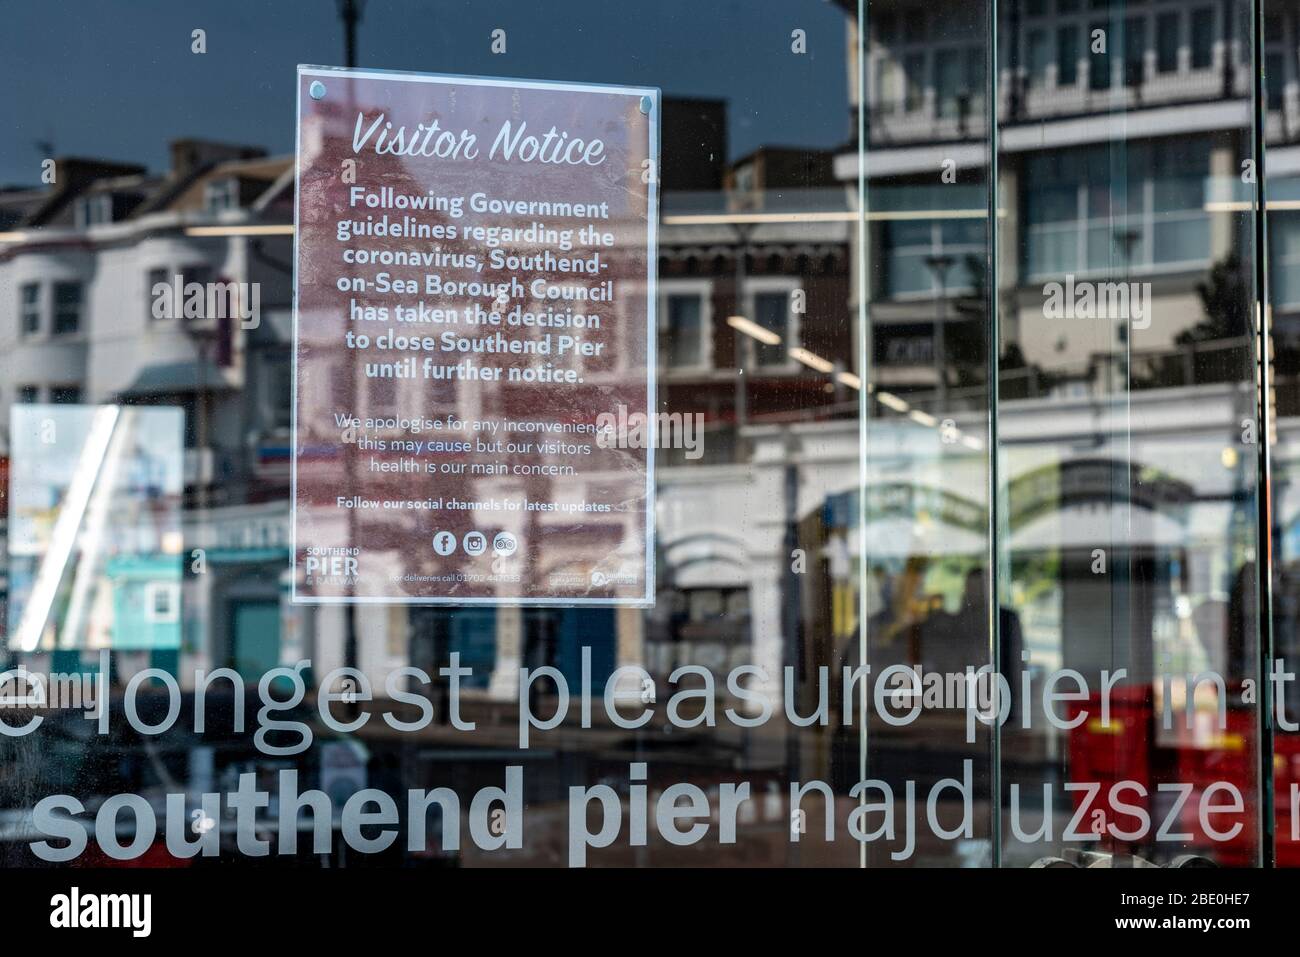 Pier entrance on Southend on Sea seafront on Easter Bank Holiday during COVID-19 Coronavirus pandemic lockdown period. Closed sign with reflection Stock Photo